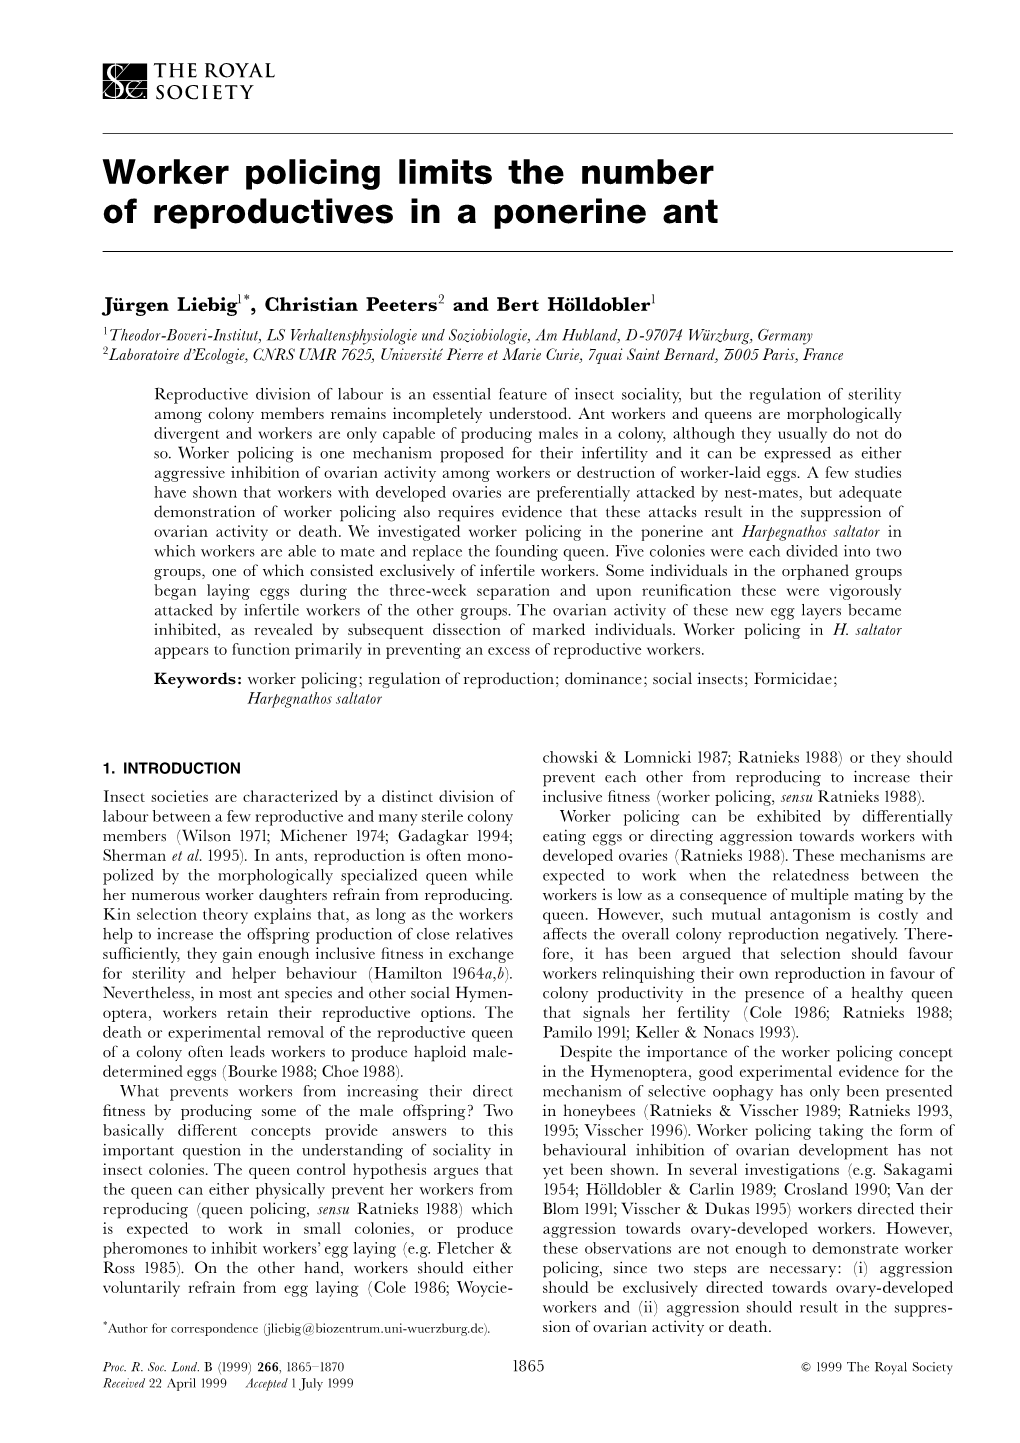 Worker Policing Limits the Number of Reproductives in a Ponerine Ant